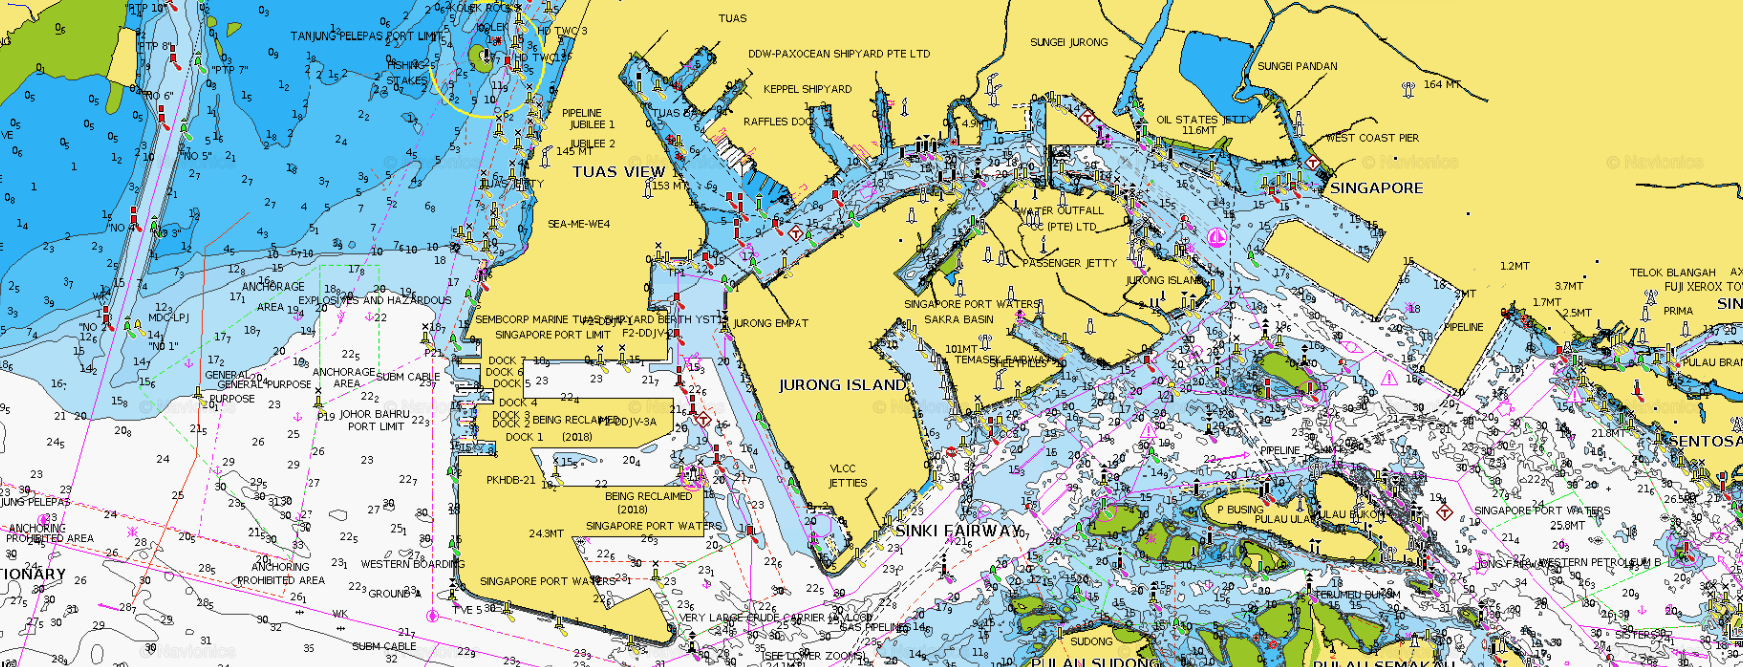 Singapore marine guide maritime port authority Singapore restricted areas tuas jurong